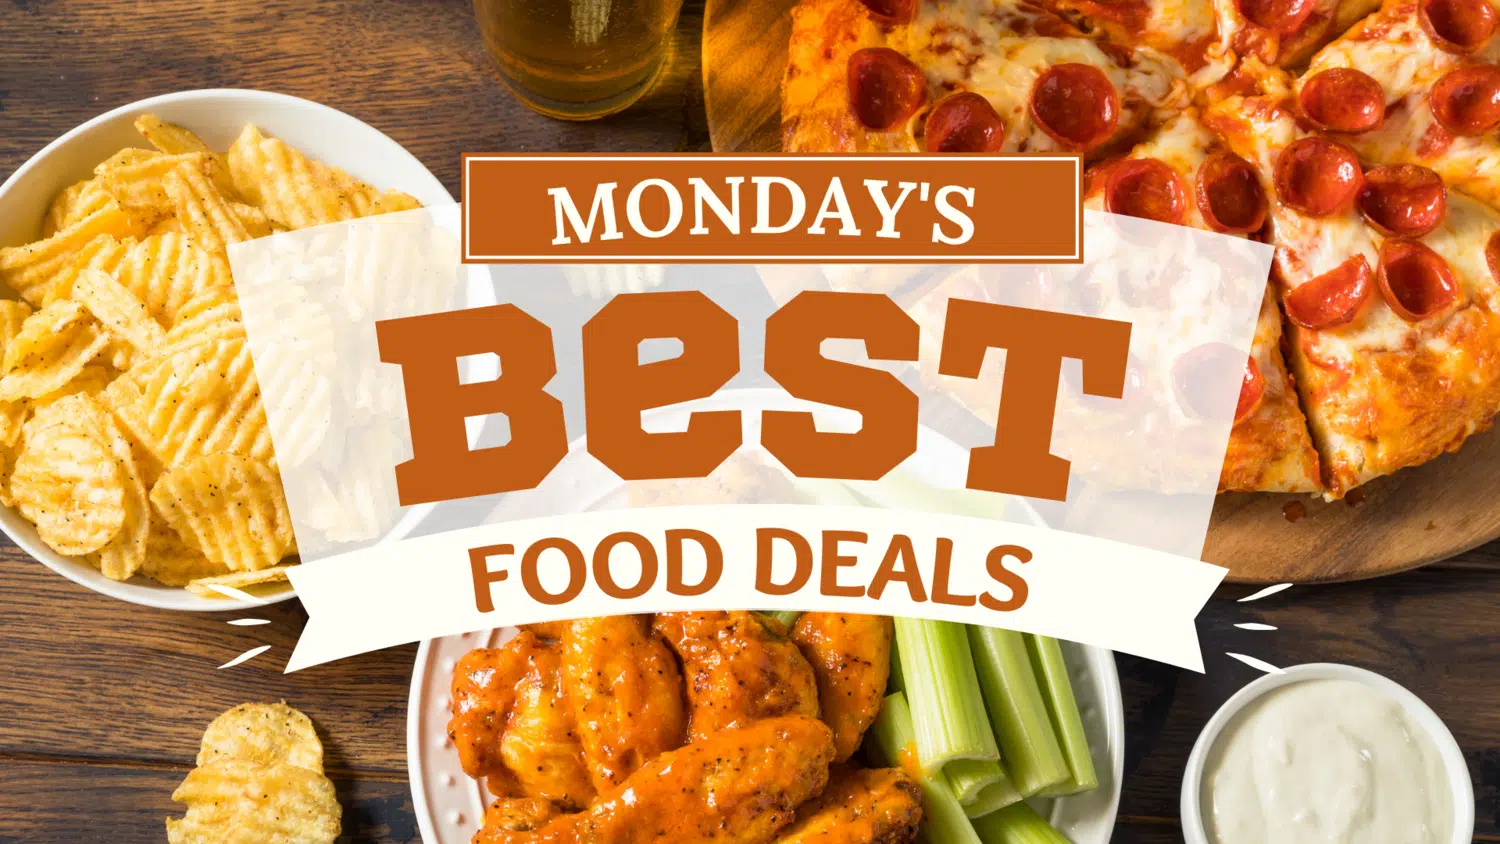 Discounted midday dining